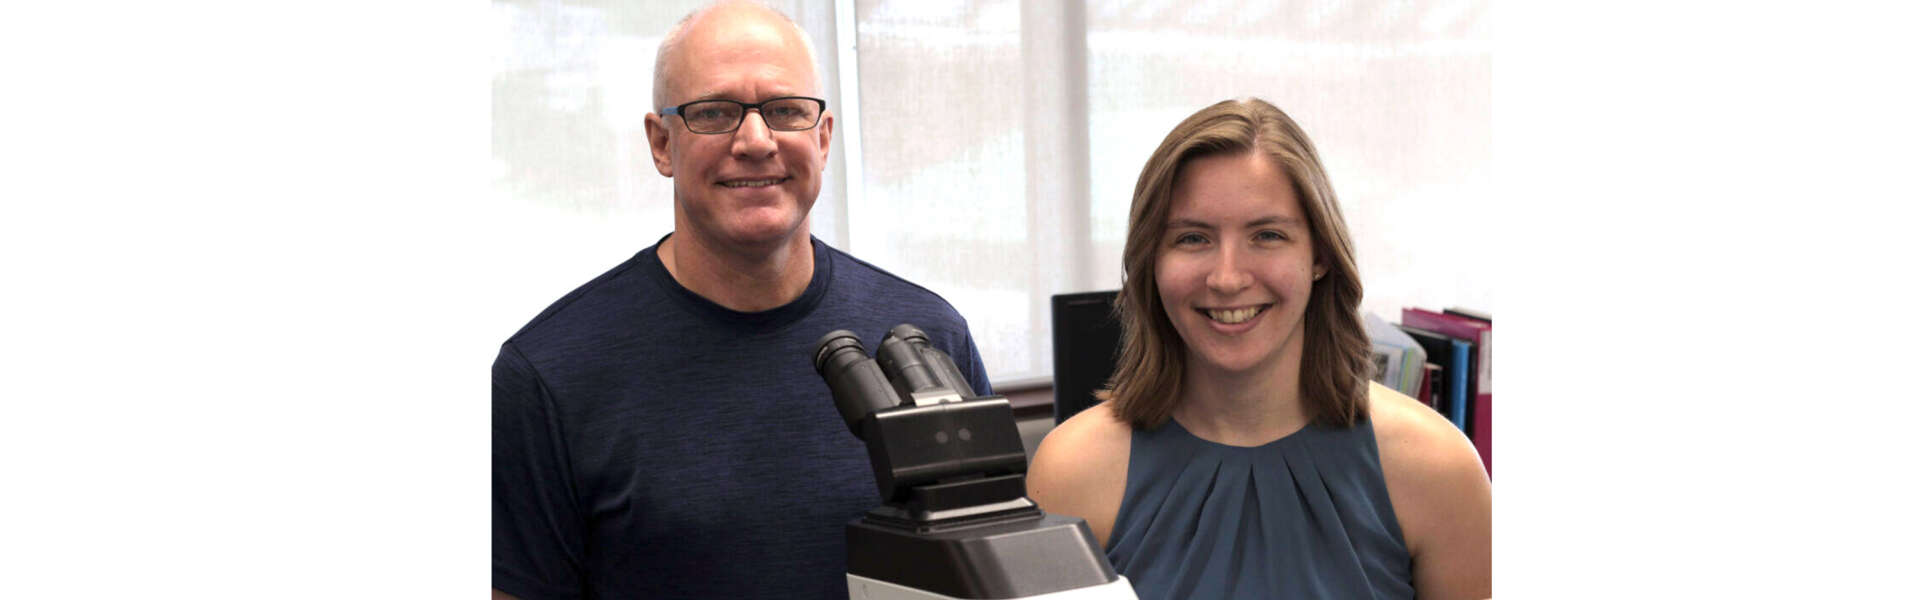 Two people sit near a microscope in a lab, smiling for the camera